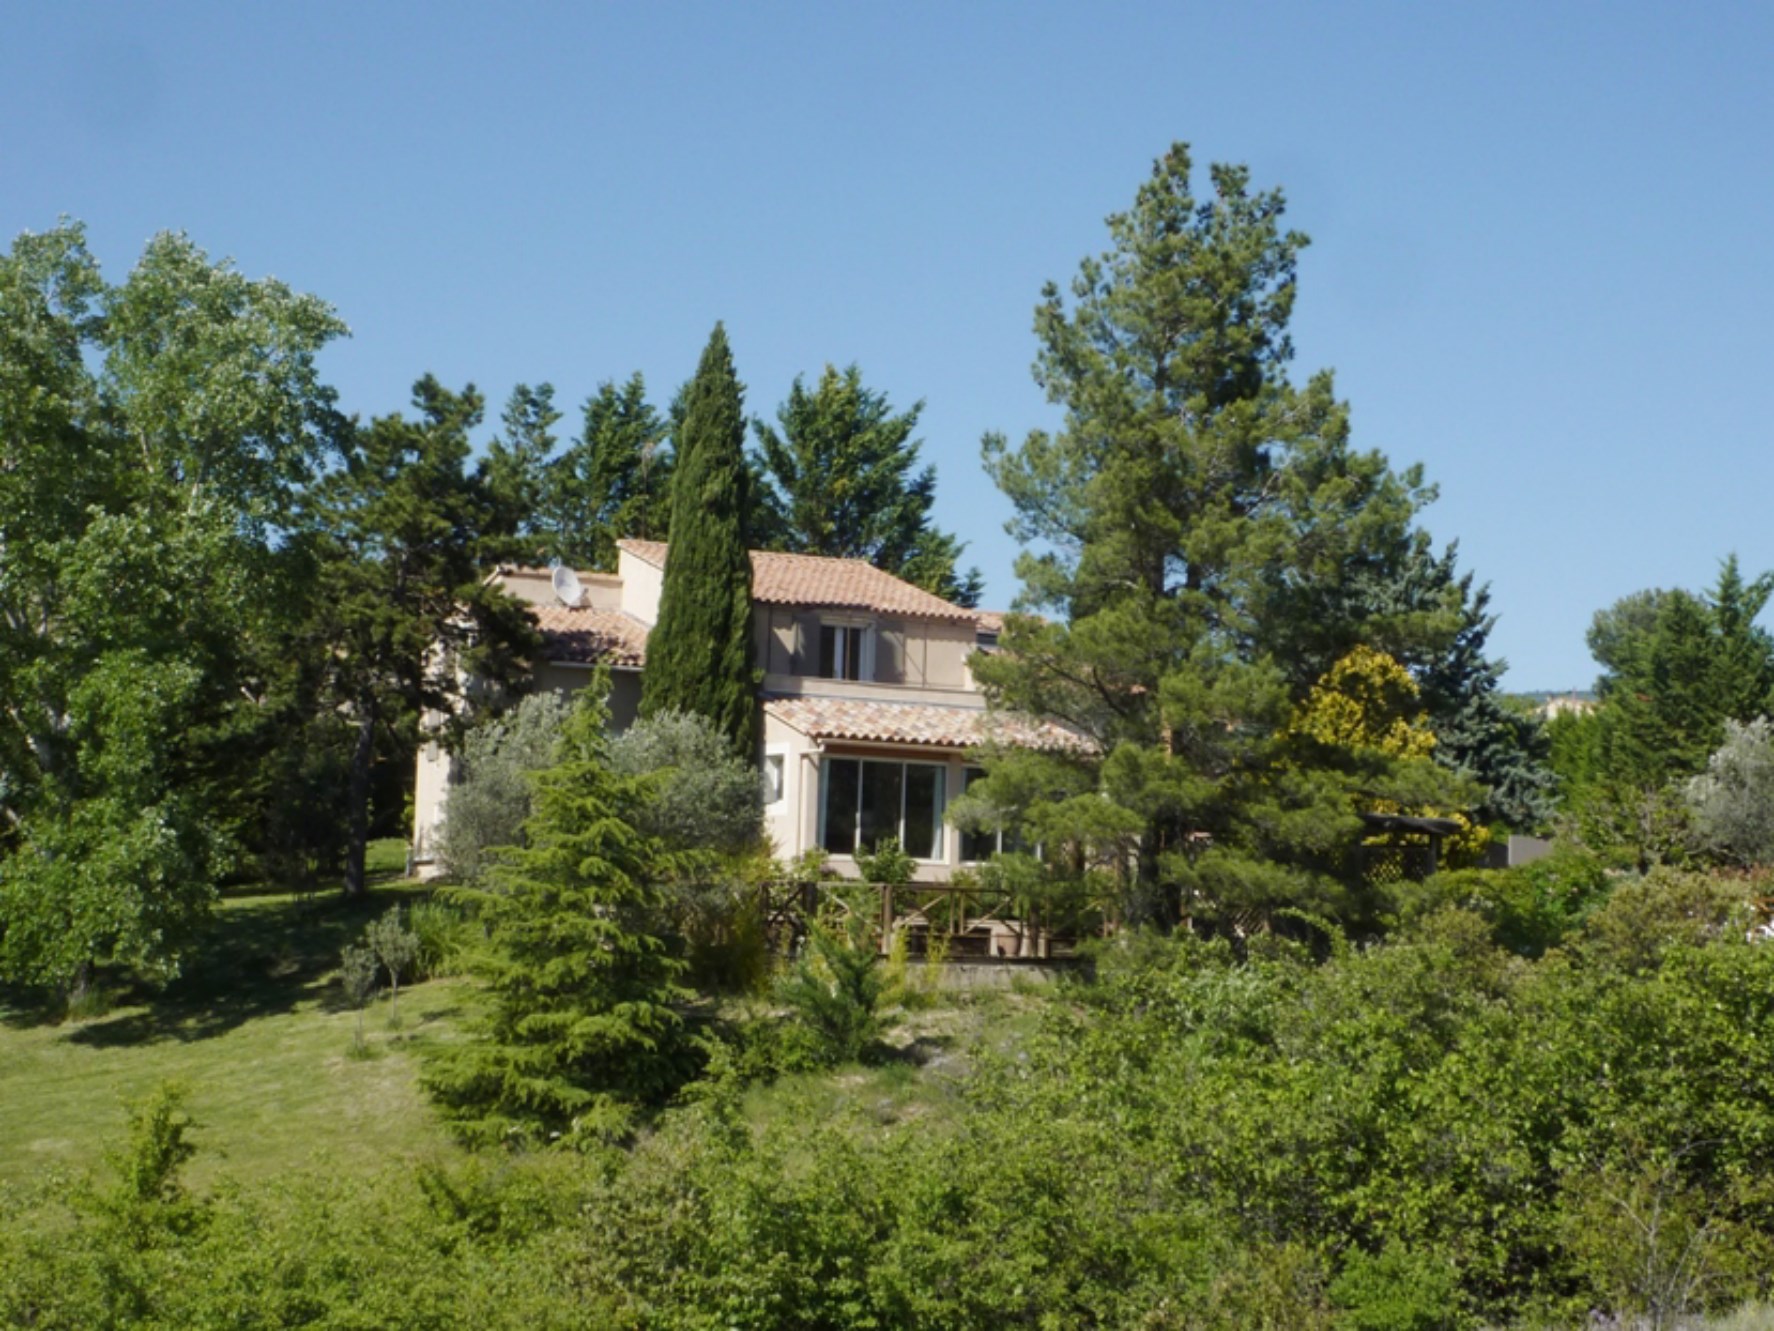 Near Roussillon and Gordes, lovely villa for sale, with garden, swimming pool and view. 